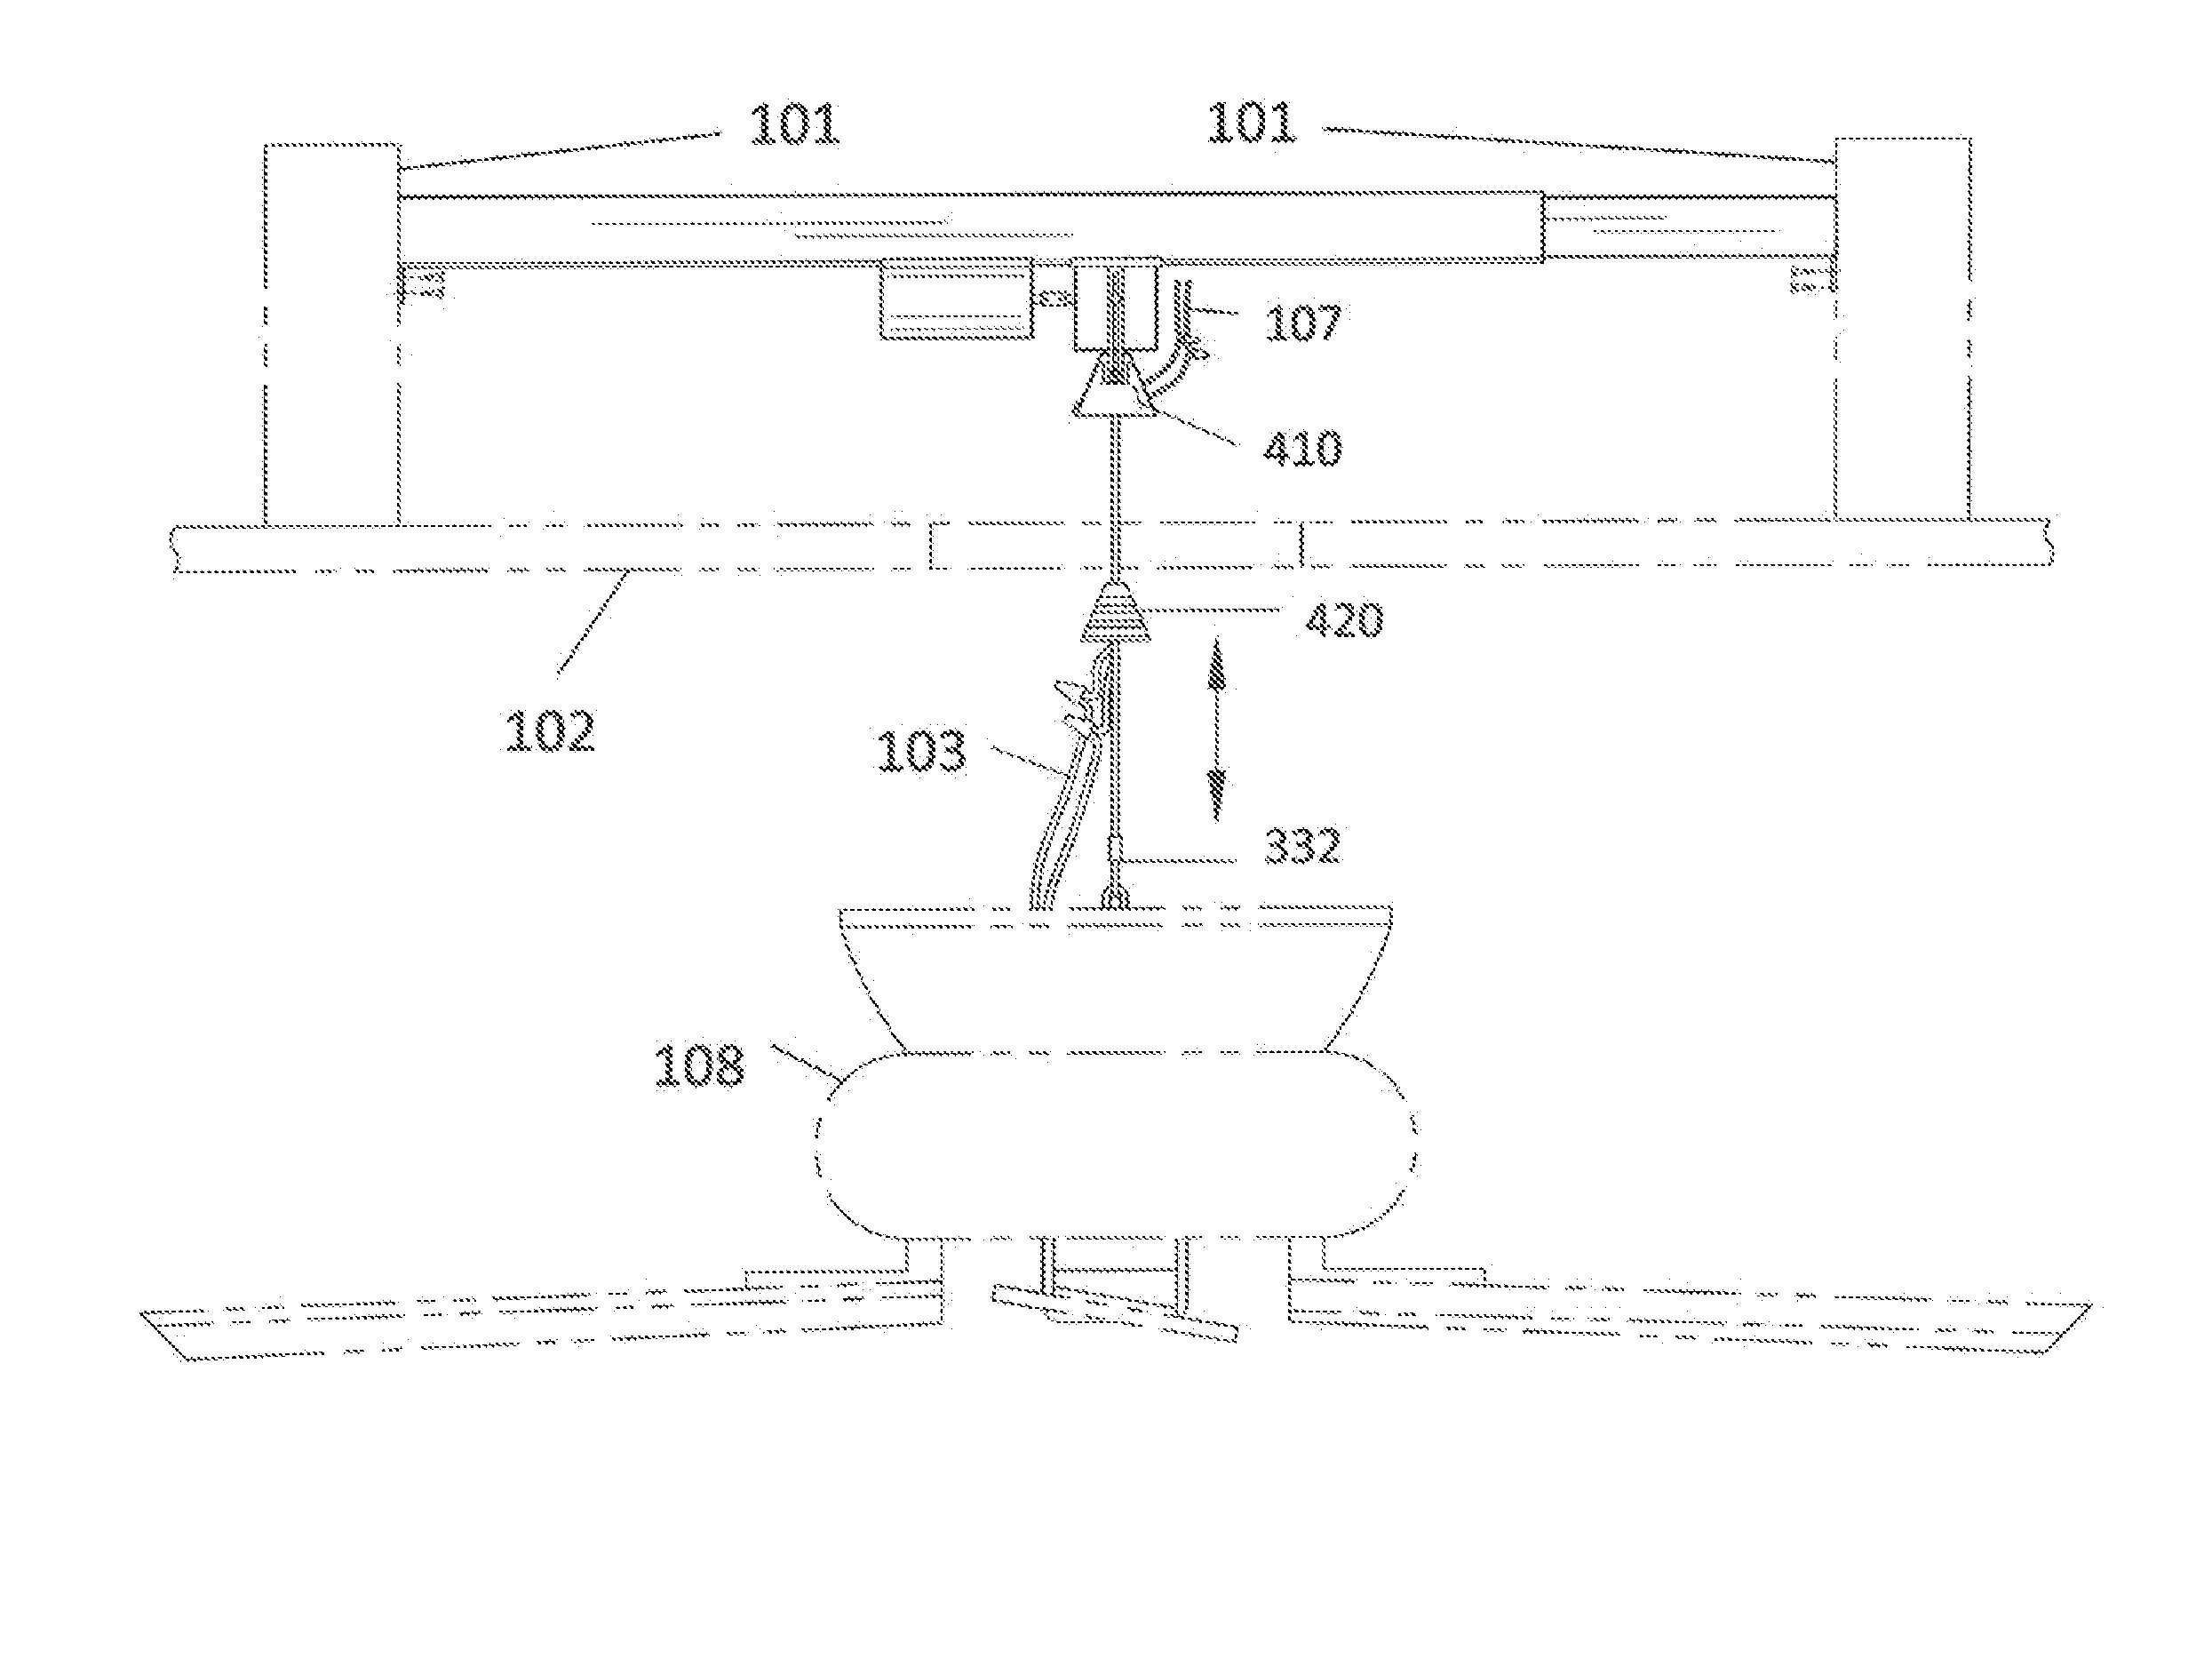 System for raising and lowering ceiling fans and light fixtures